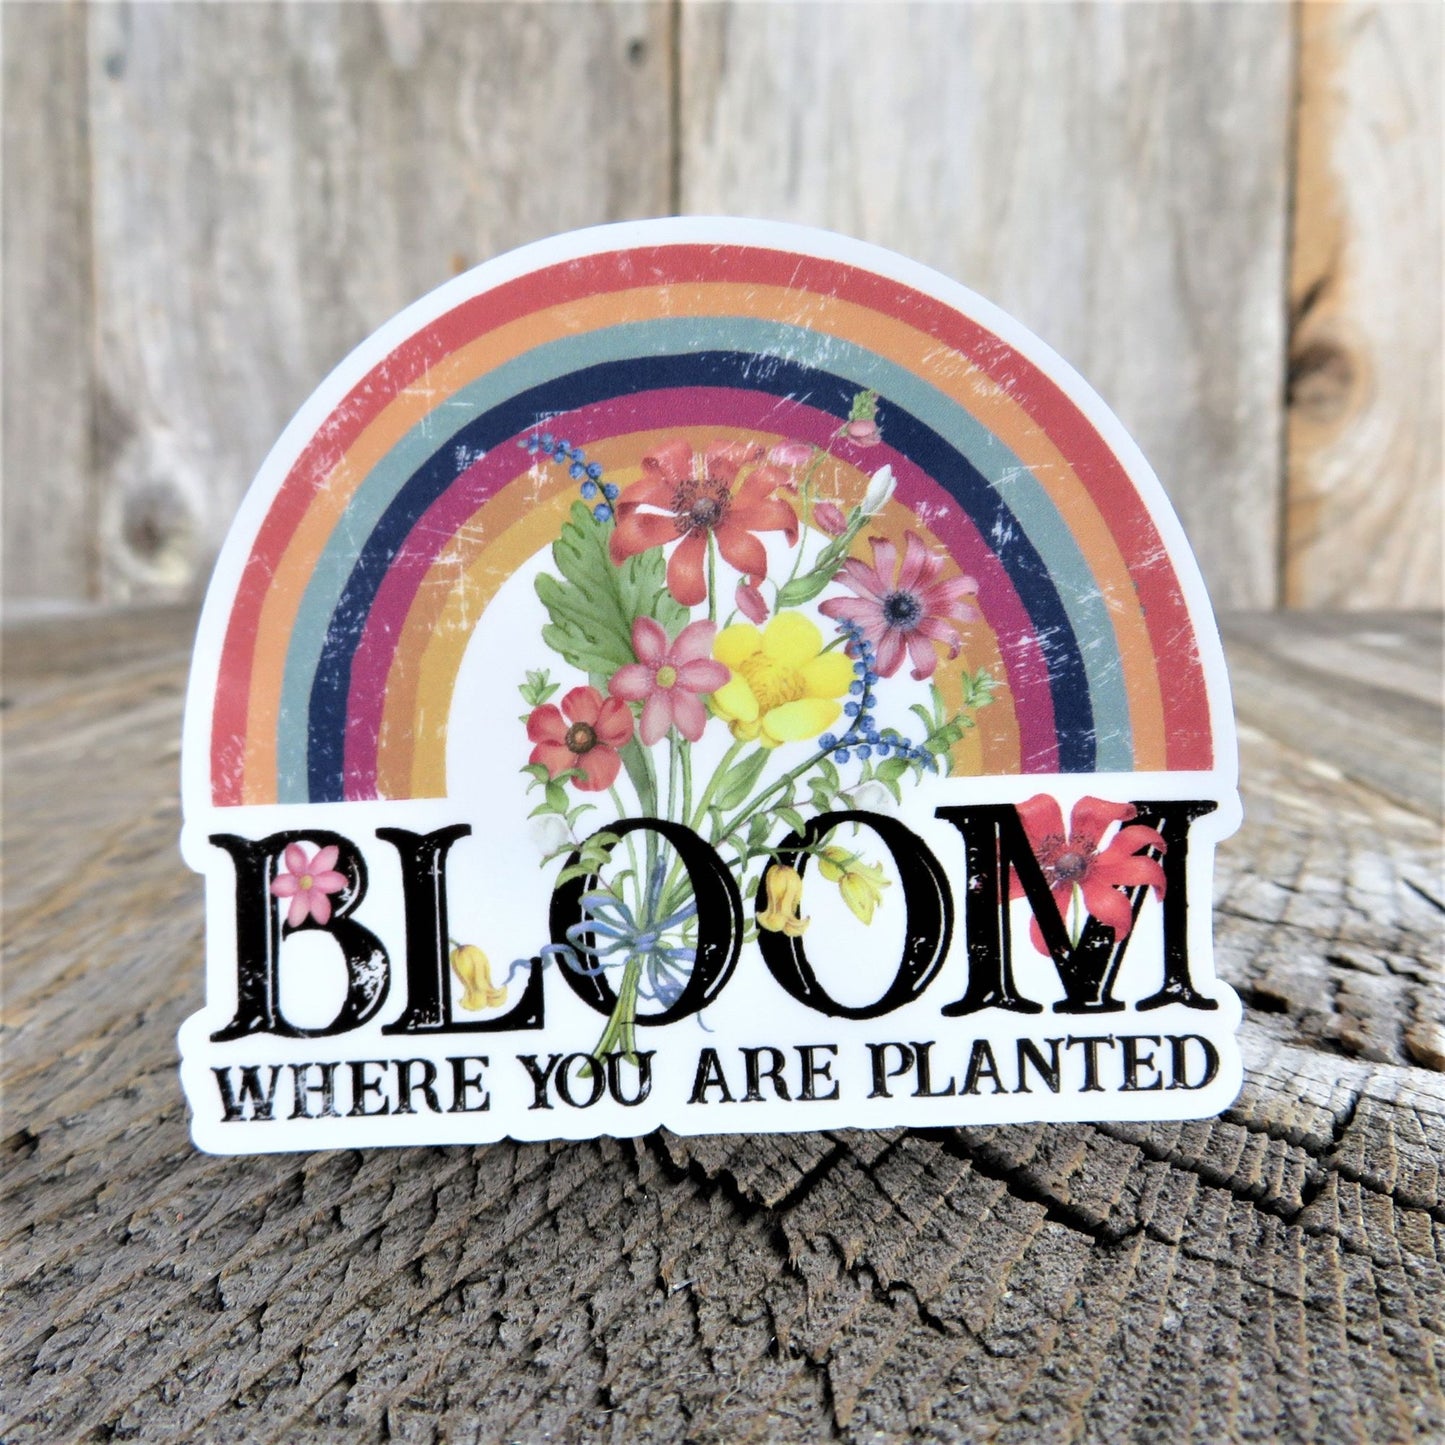 Rainbow Flowers Bloom Where You Are Planted Sticker BoHo Distressed Rustic Decal Full Color Waterproof Gardener Bugs Car Water Bottle Laptop